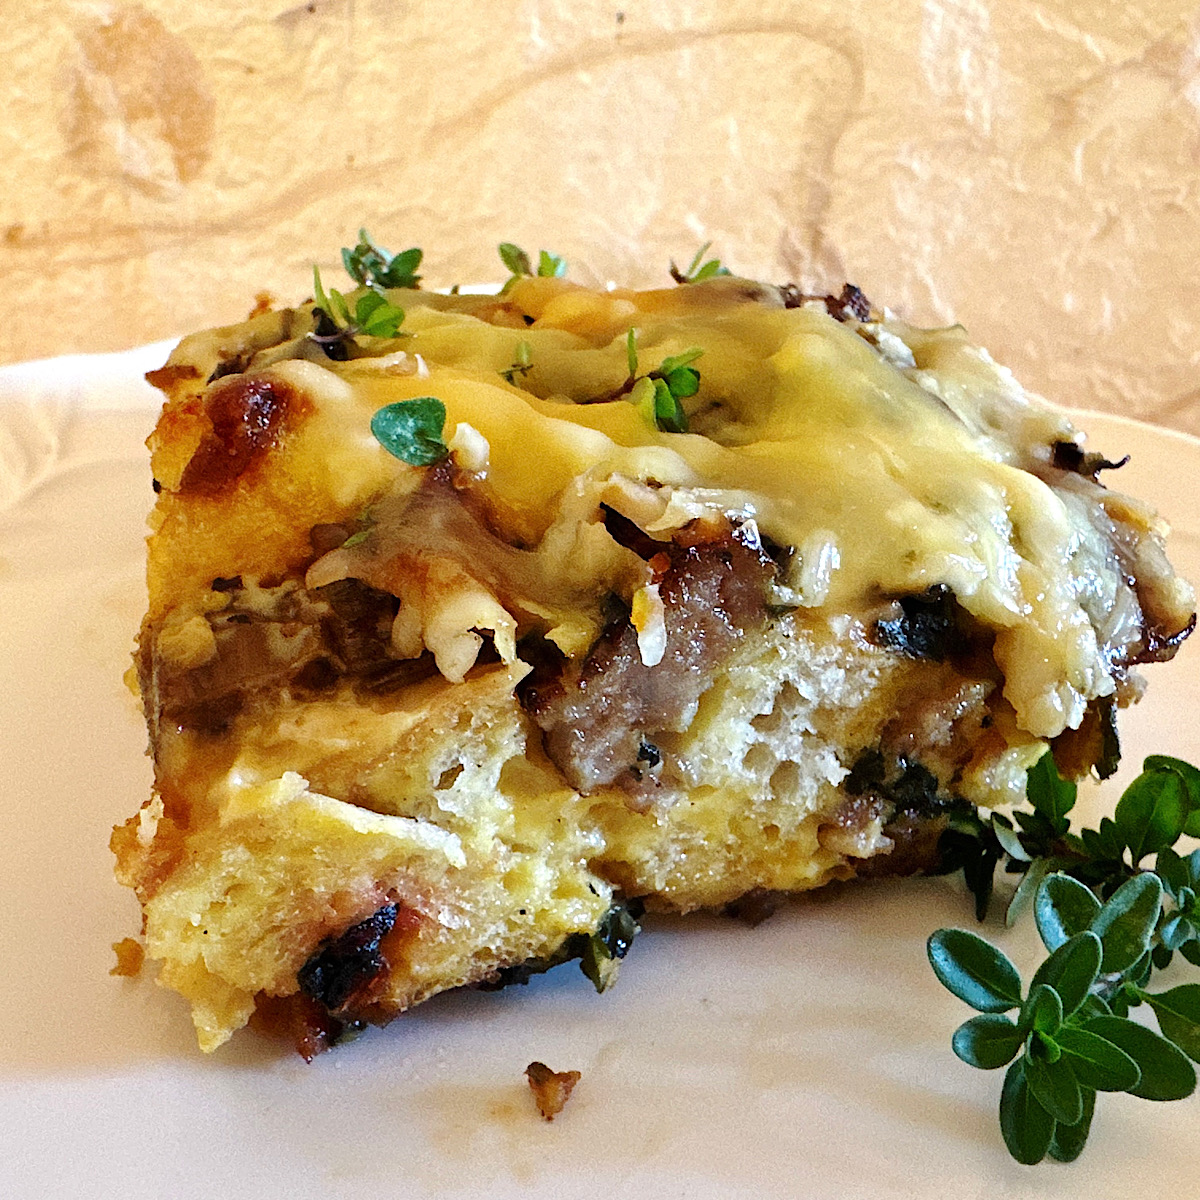 Serving of egg casserole (strata) with sausage and swiss chard on a plate.